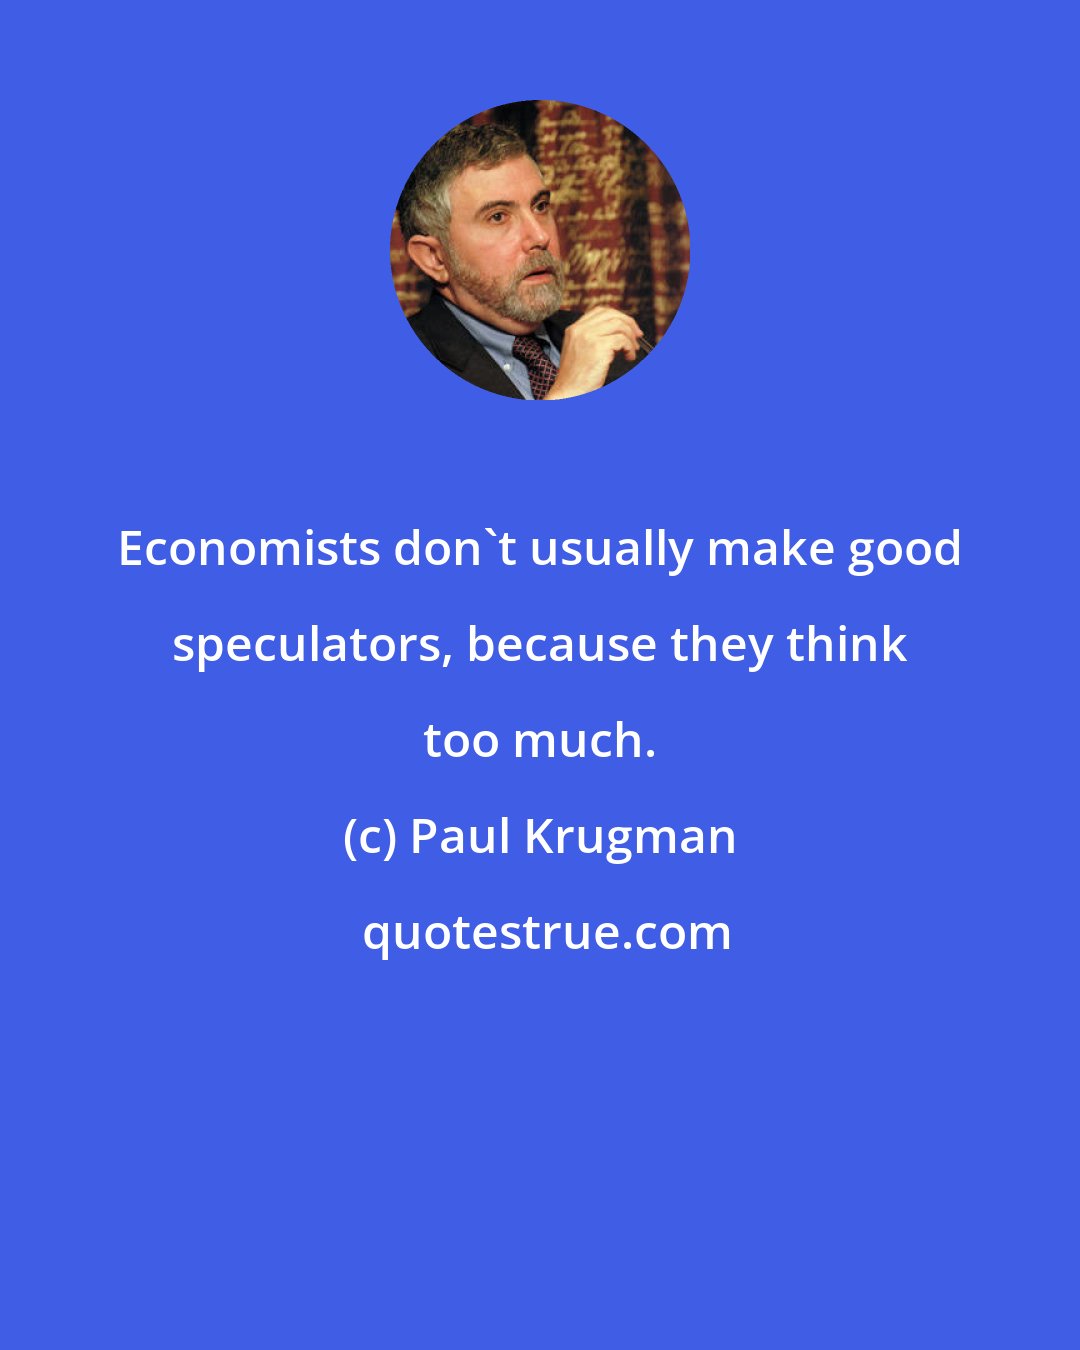 Paul Krugman: Economists don't usually make good speculators, because they think too much.